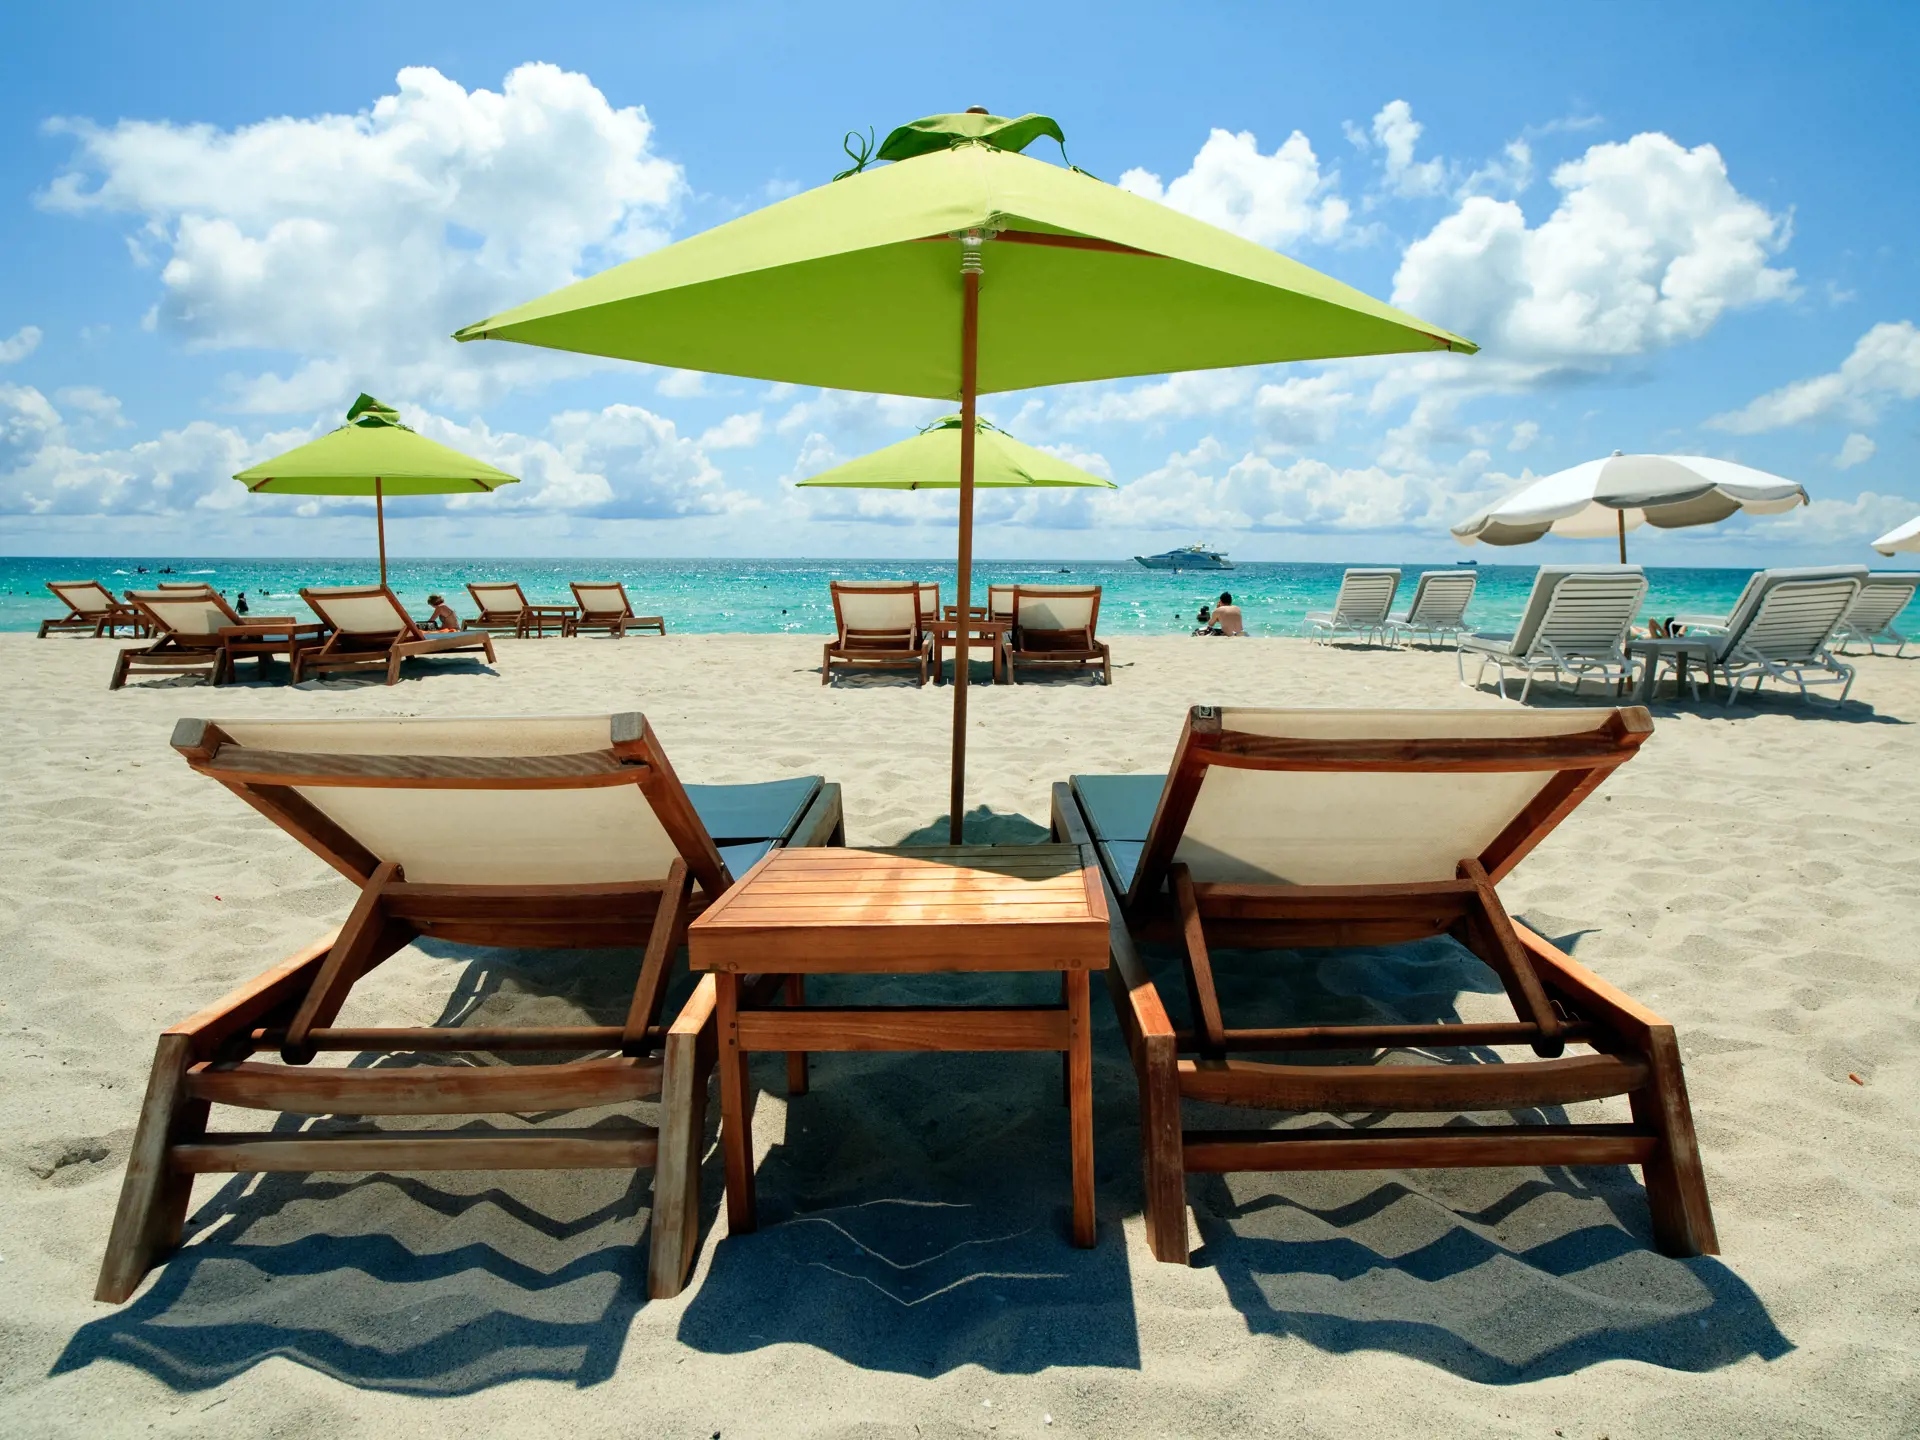 shutterstock_53590102 South Beach Lounge Chairs and Umbrellas.jpg